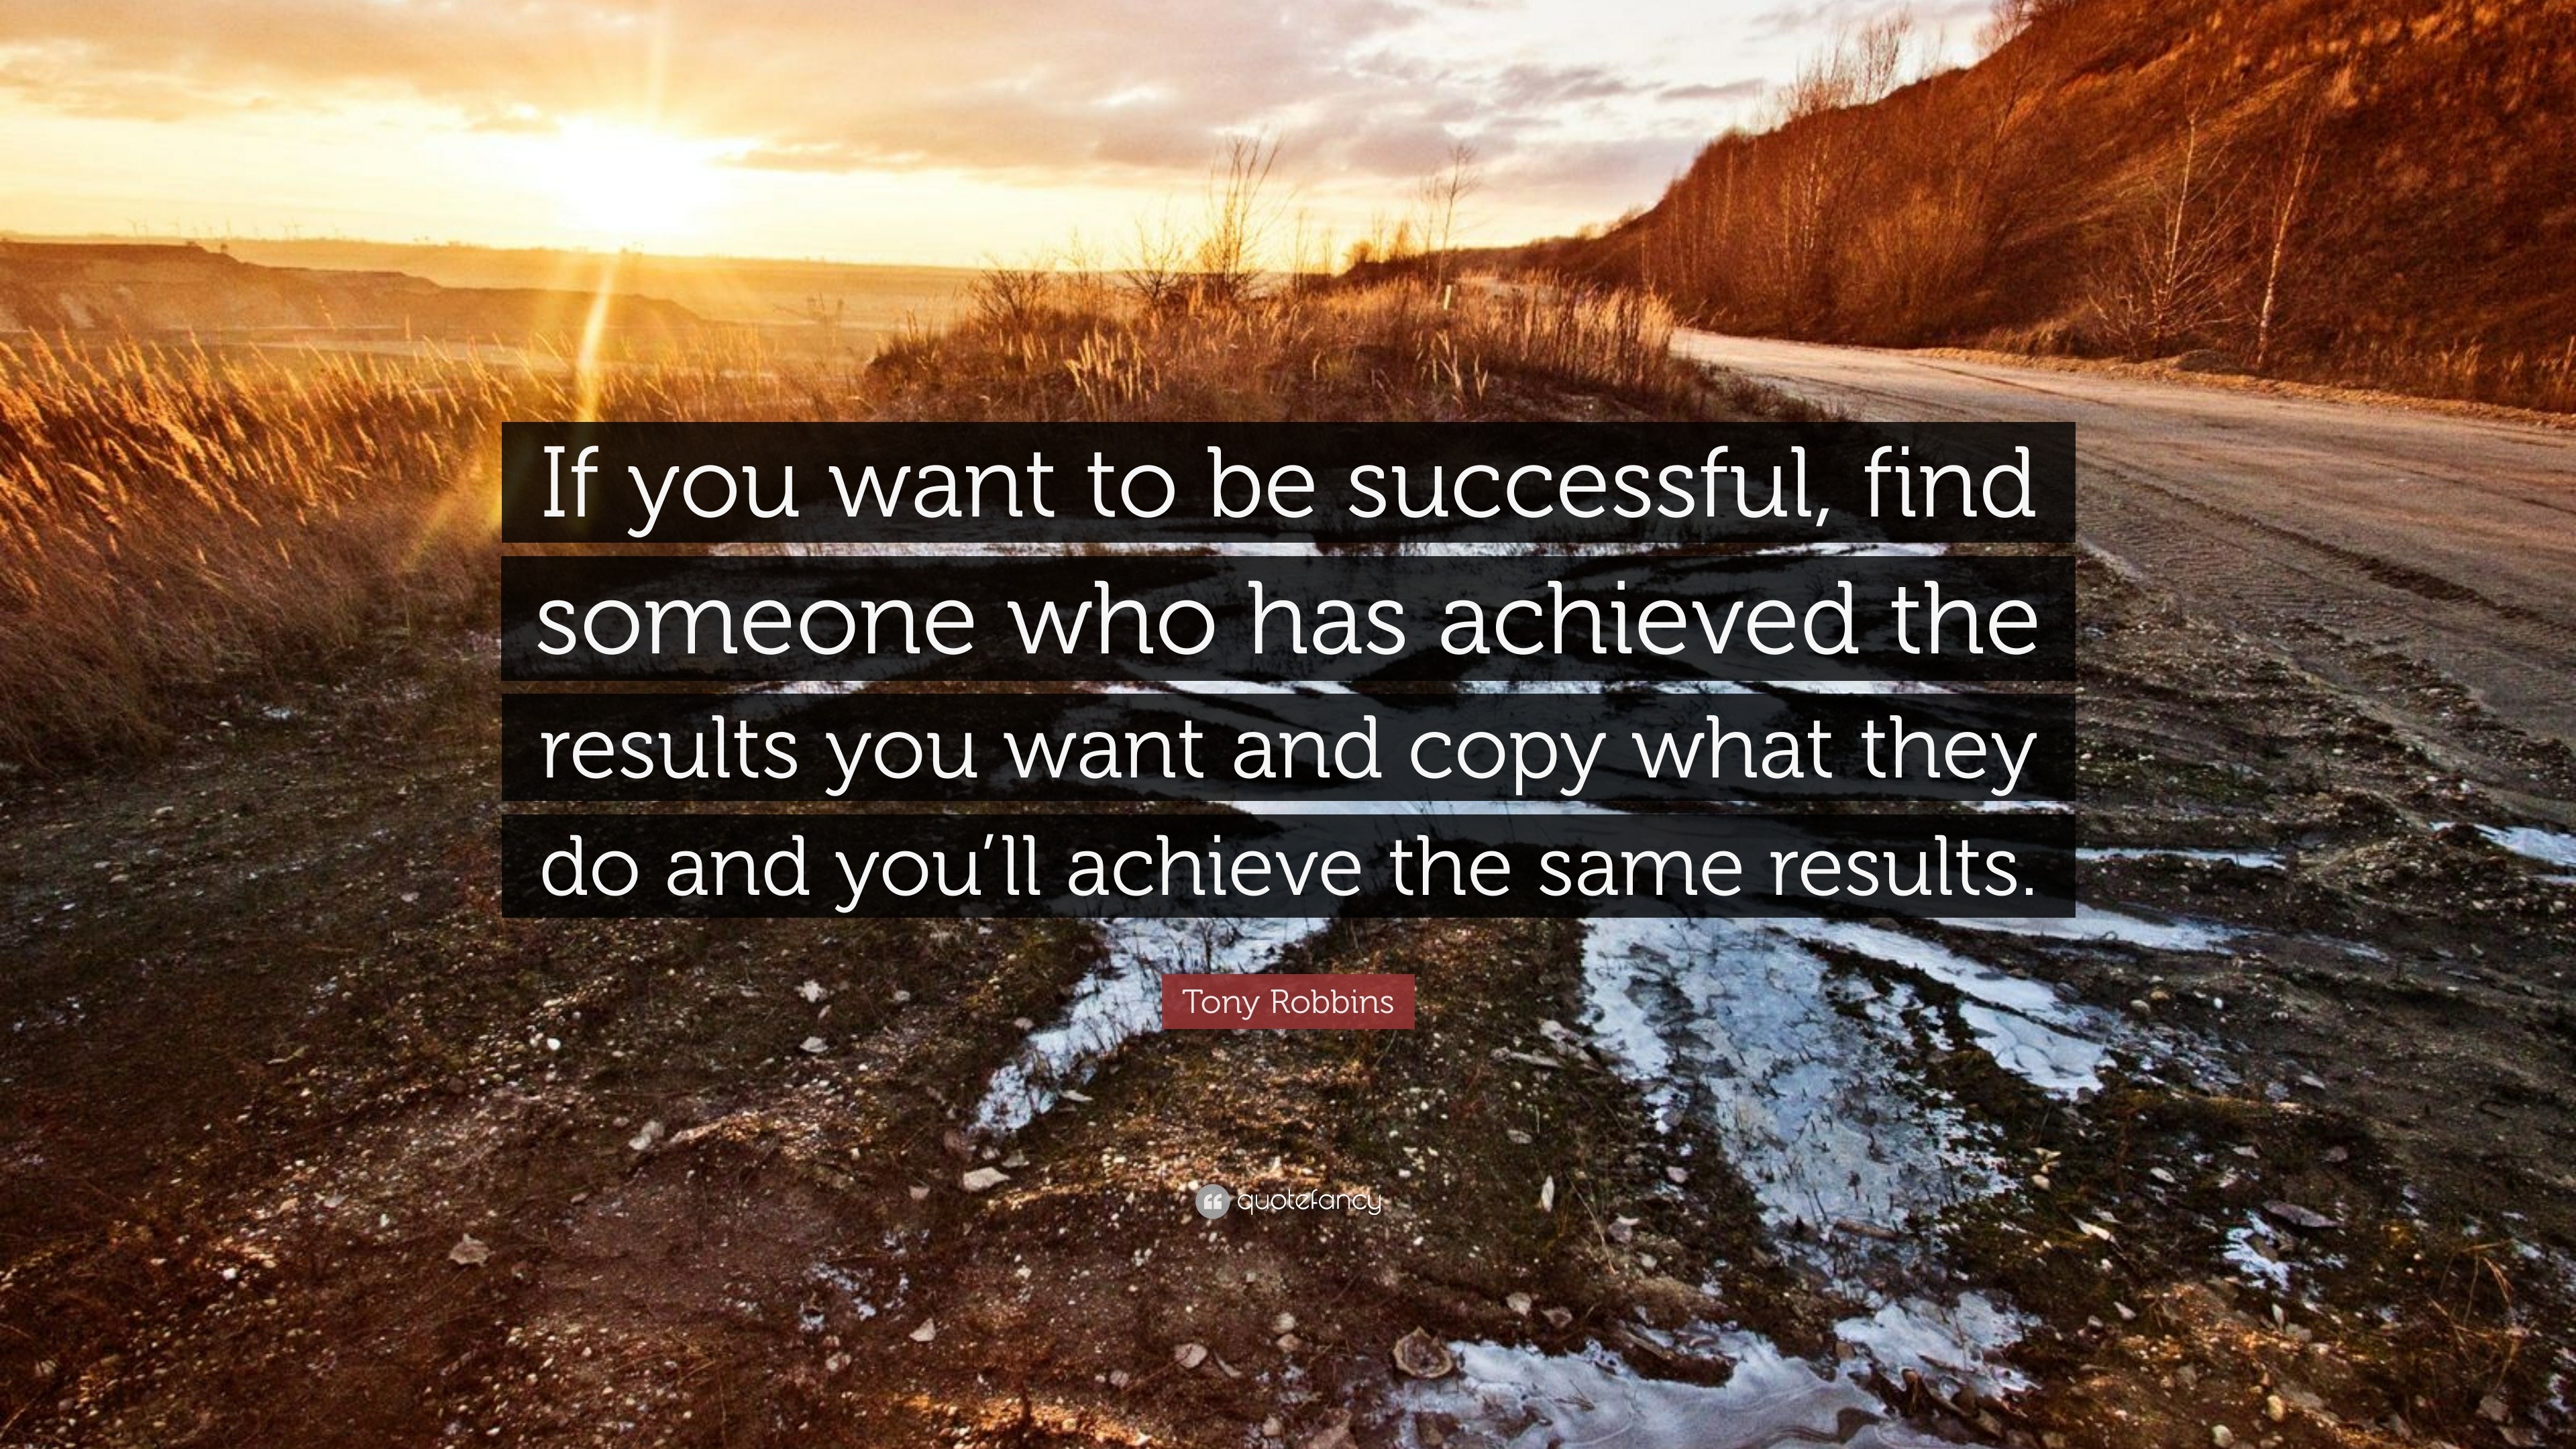 Tony Robbins Quote: “If you want to be successful, find someone who has ...